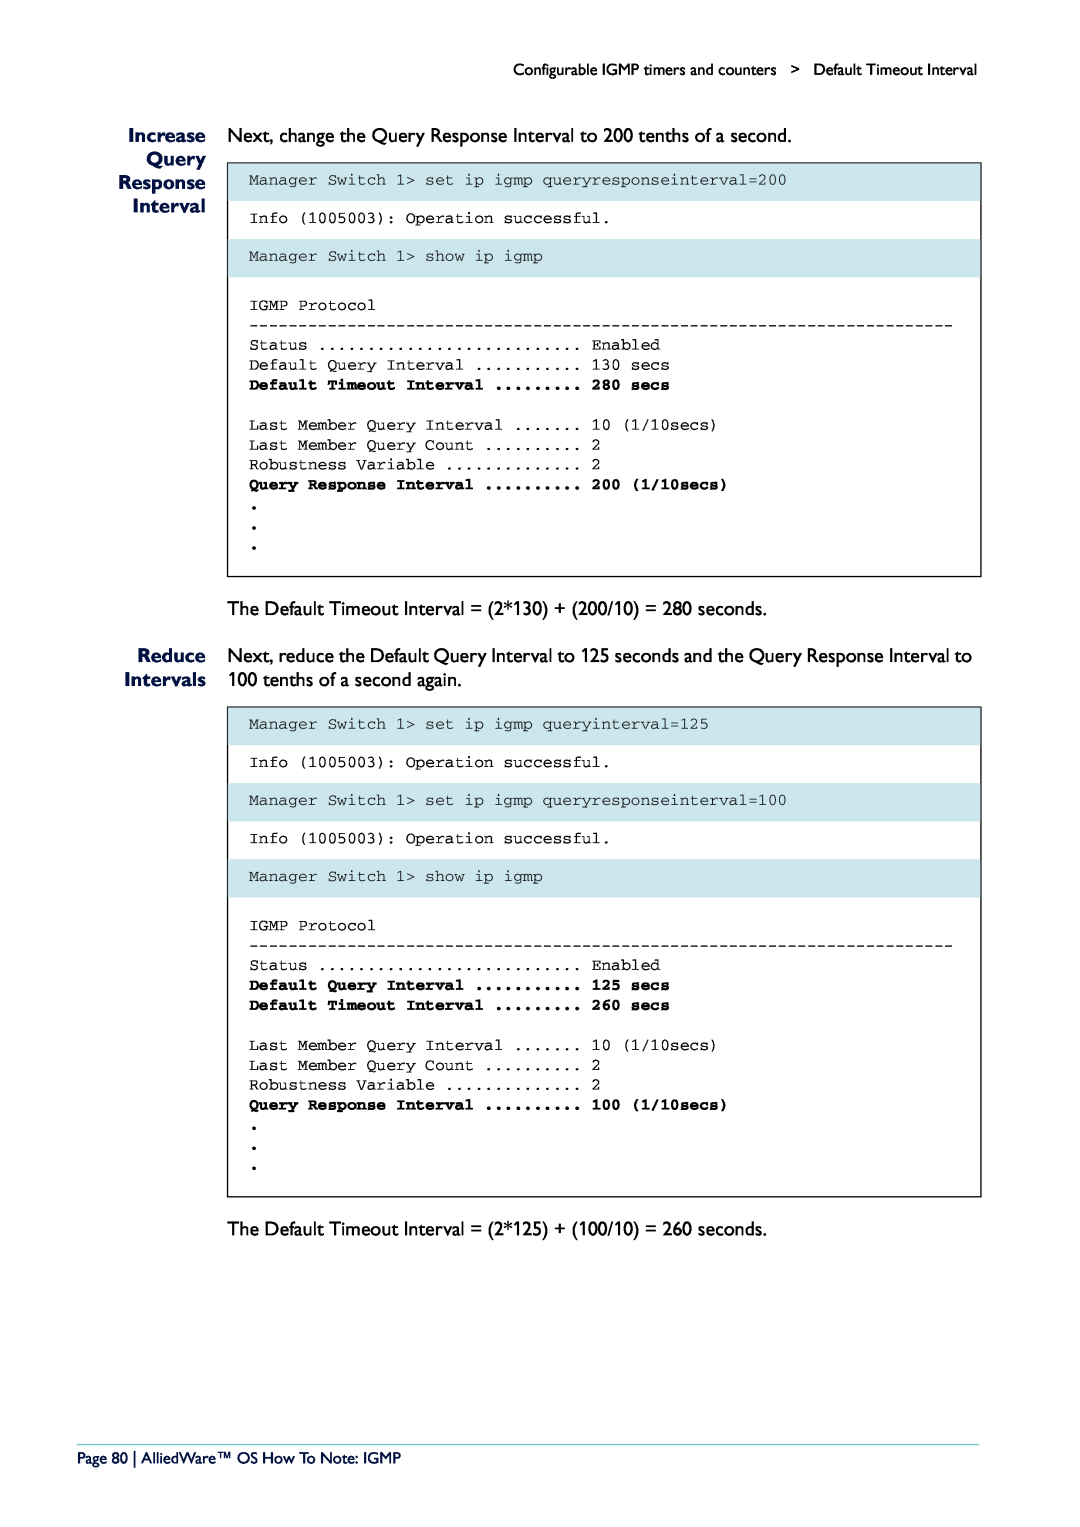 Allied Telesis AR400 manual Increase Query Response Interval, Page 80 AlliedWare OS How To Note IGMP 